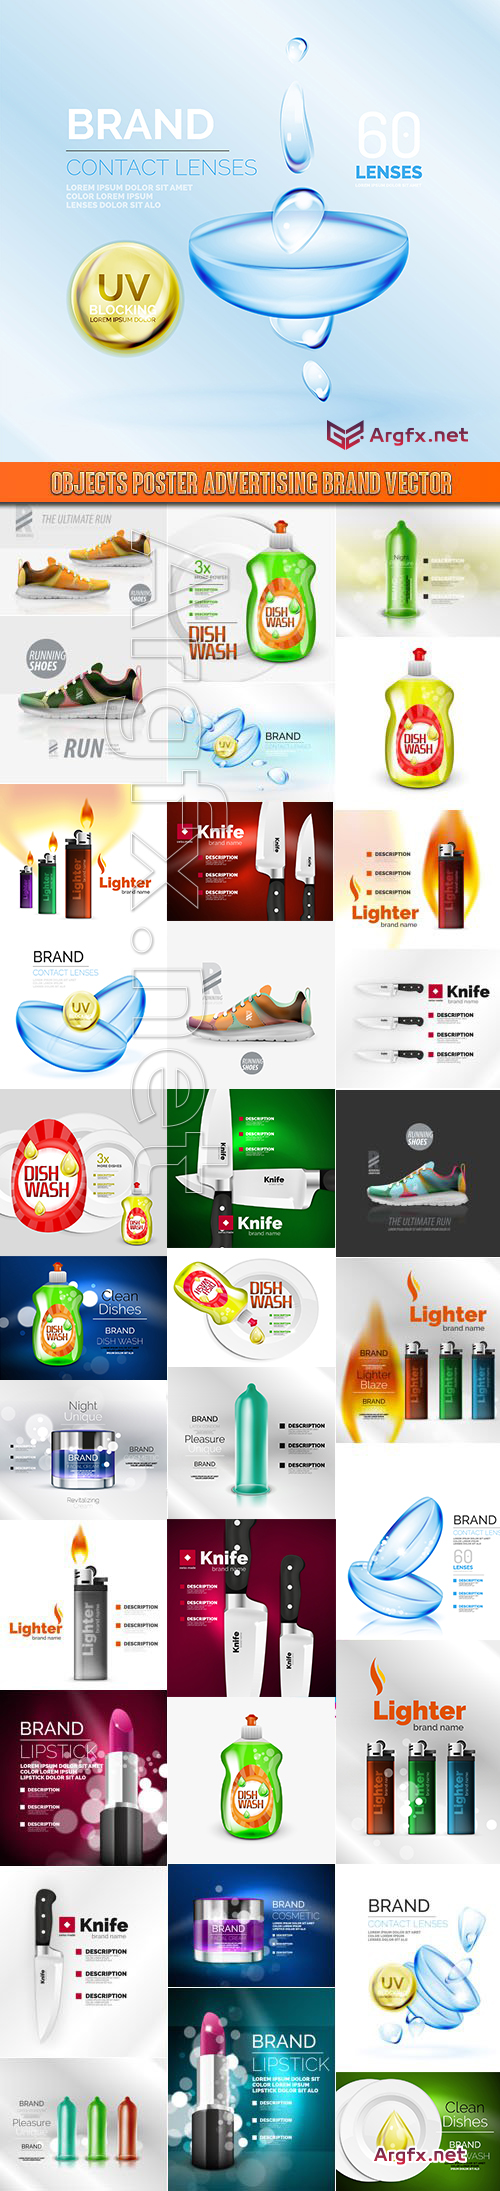  Objects poster advertising brand vector